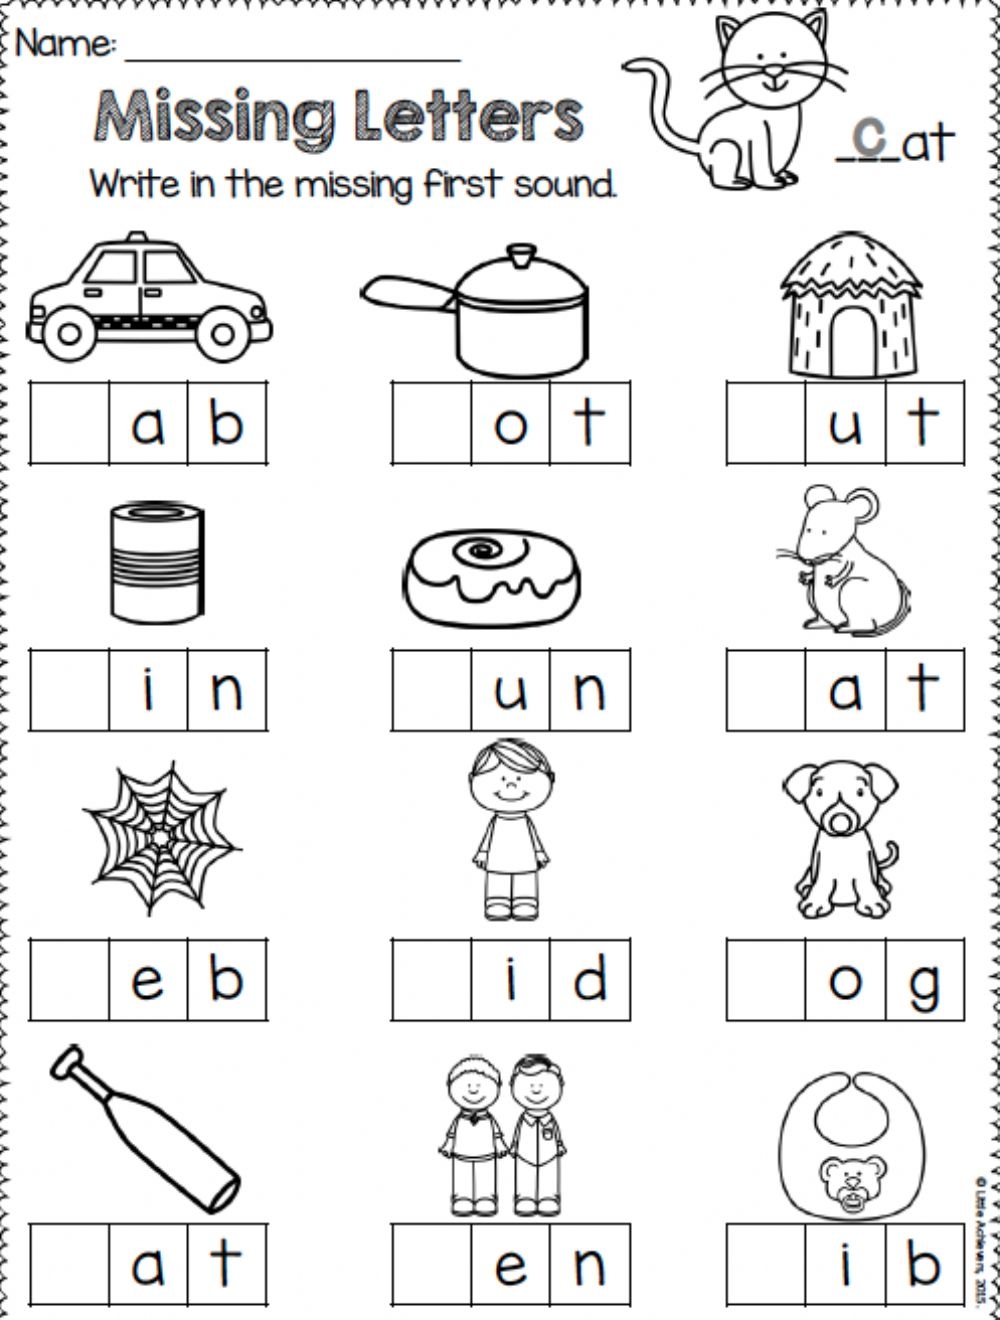 search-for-words-with-missing-letters-word-search-printable